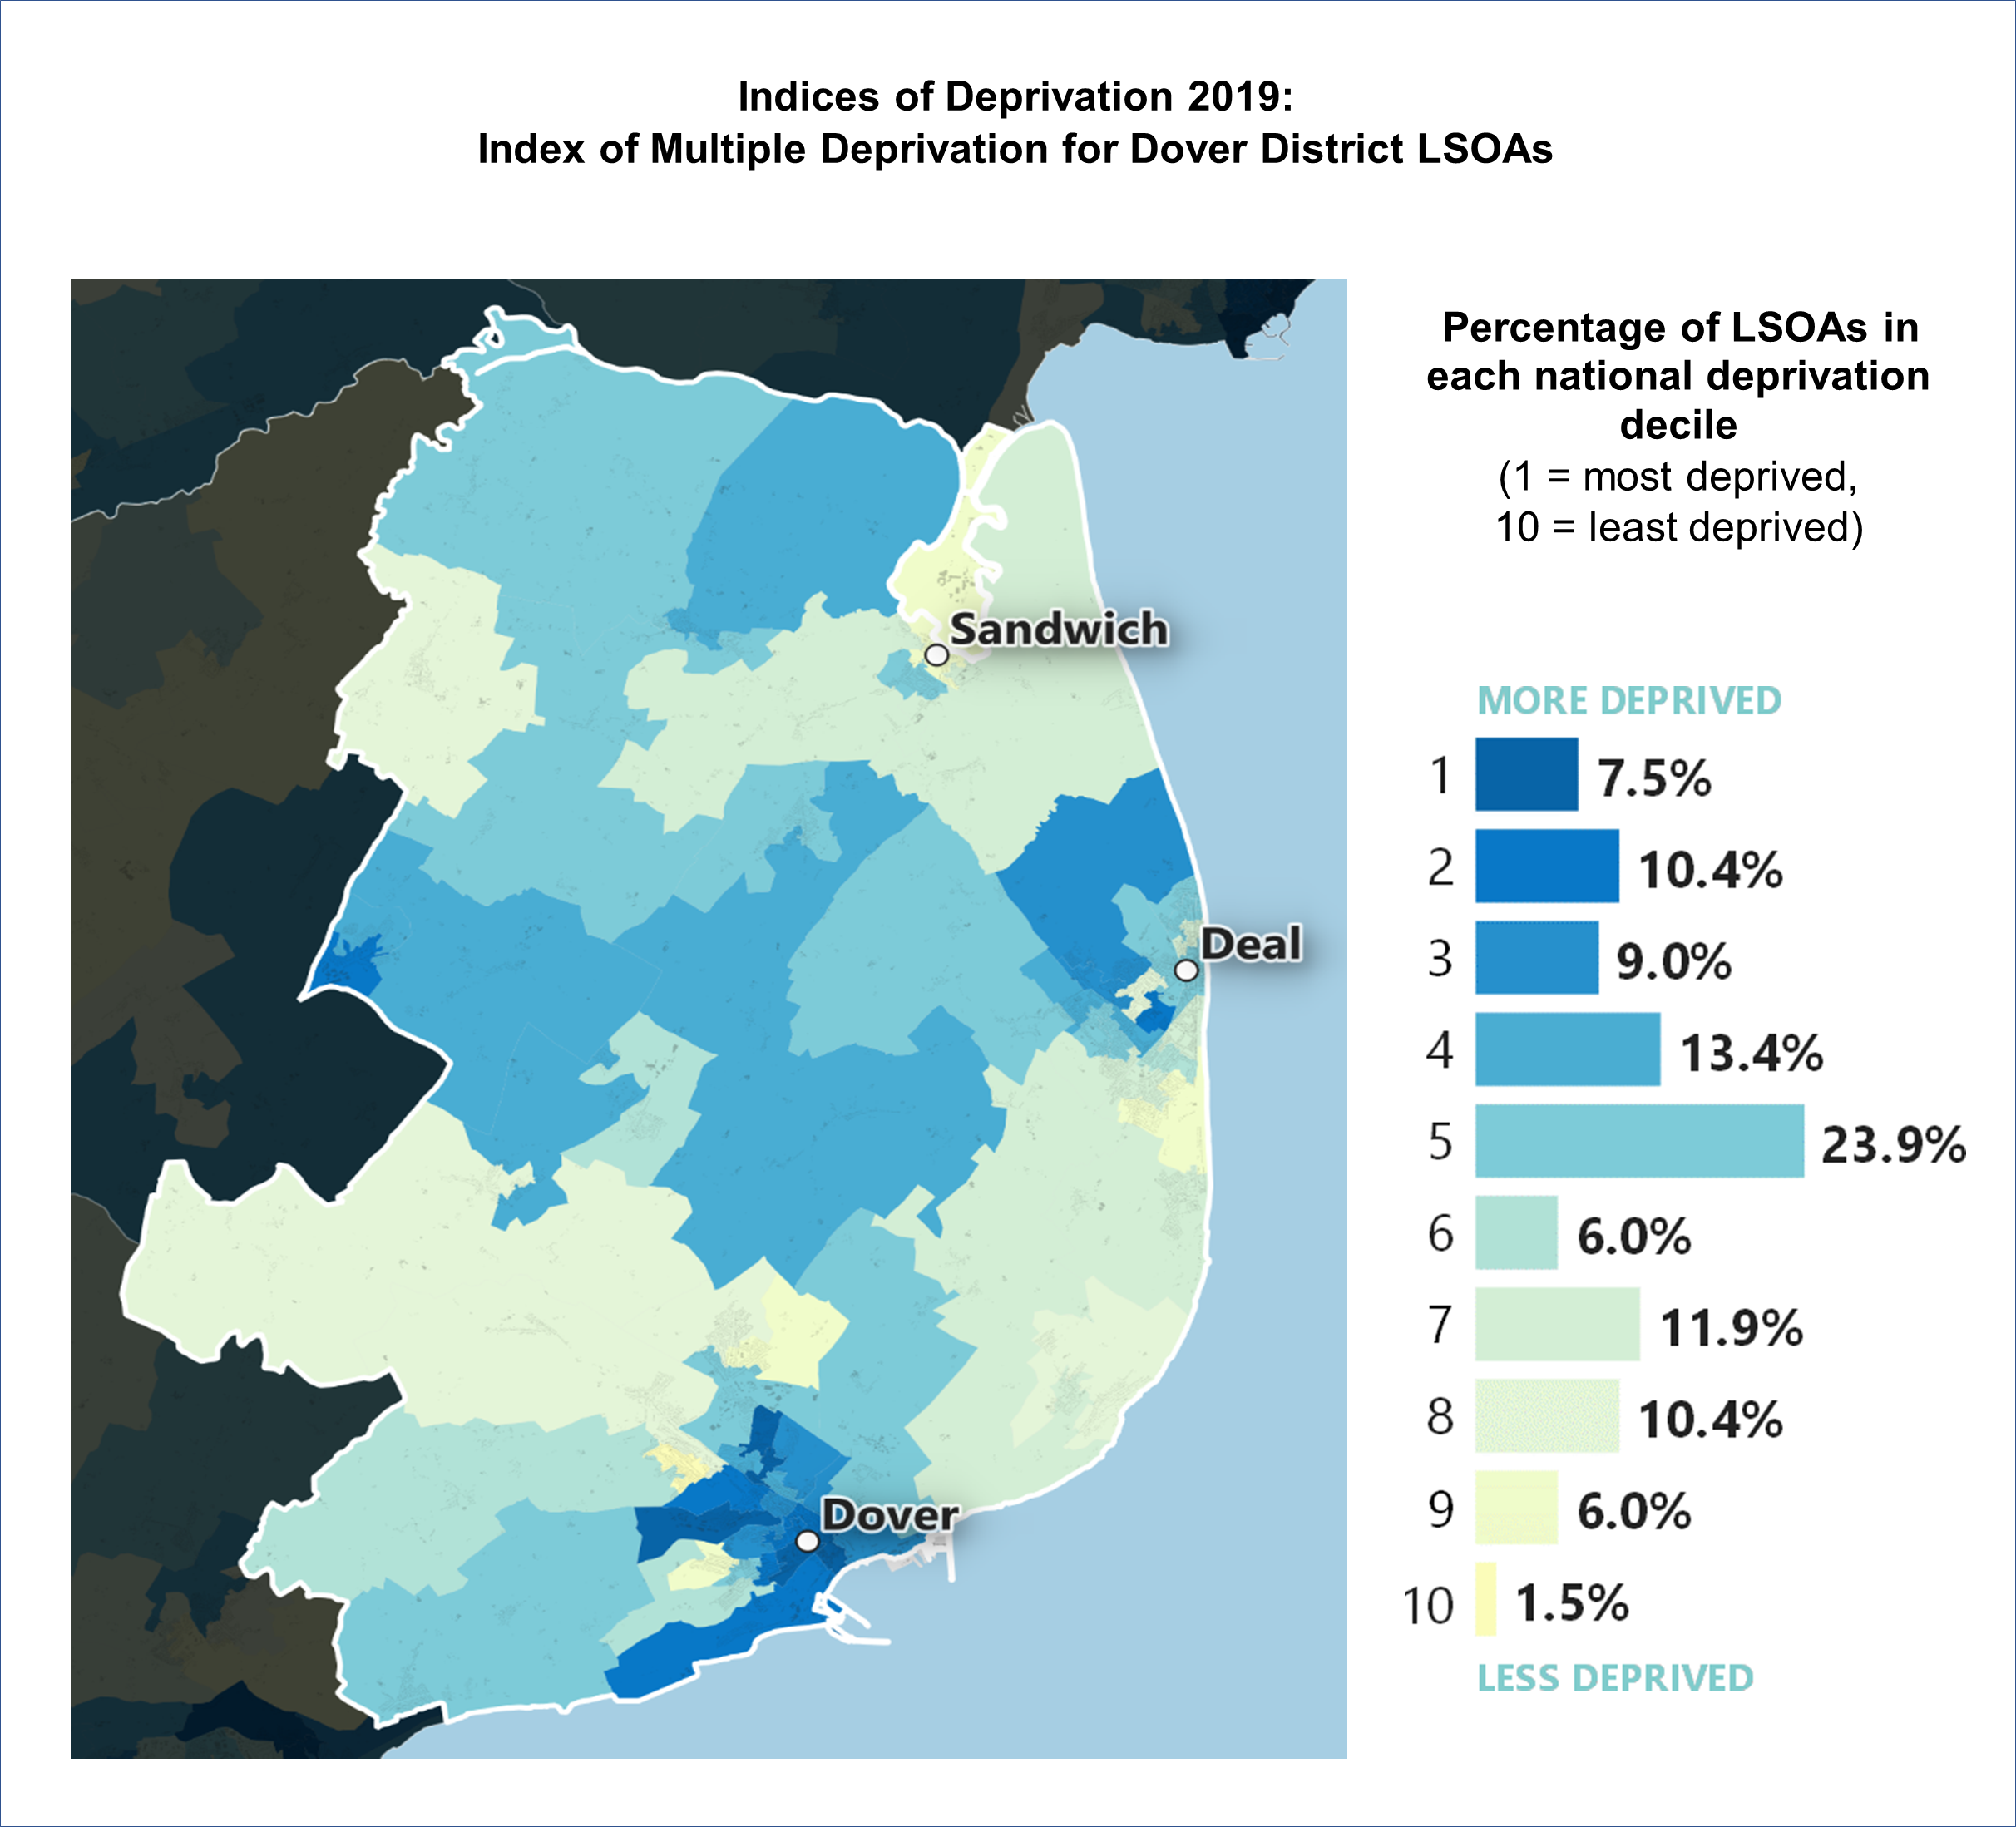 IMD 2019 map of the Dover District showing different levels of deprivation across the district and percentage of LSOAs in each national deprivation decile. Text is detailed below the map.